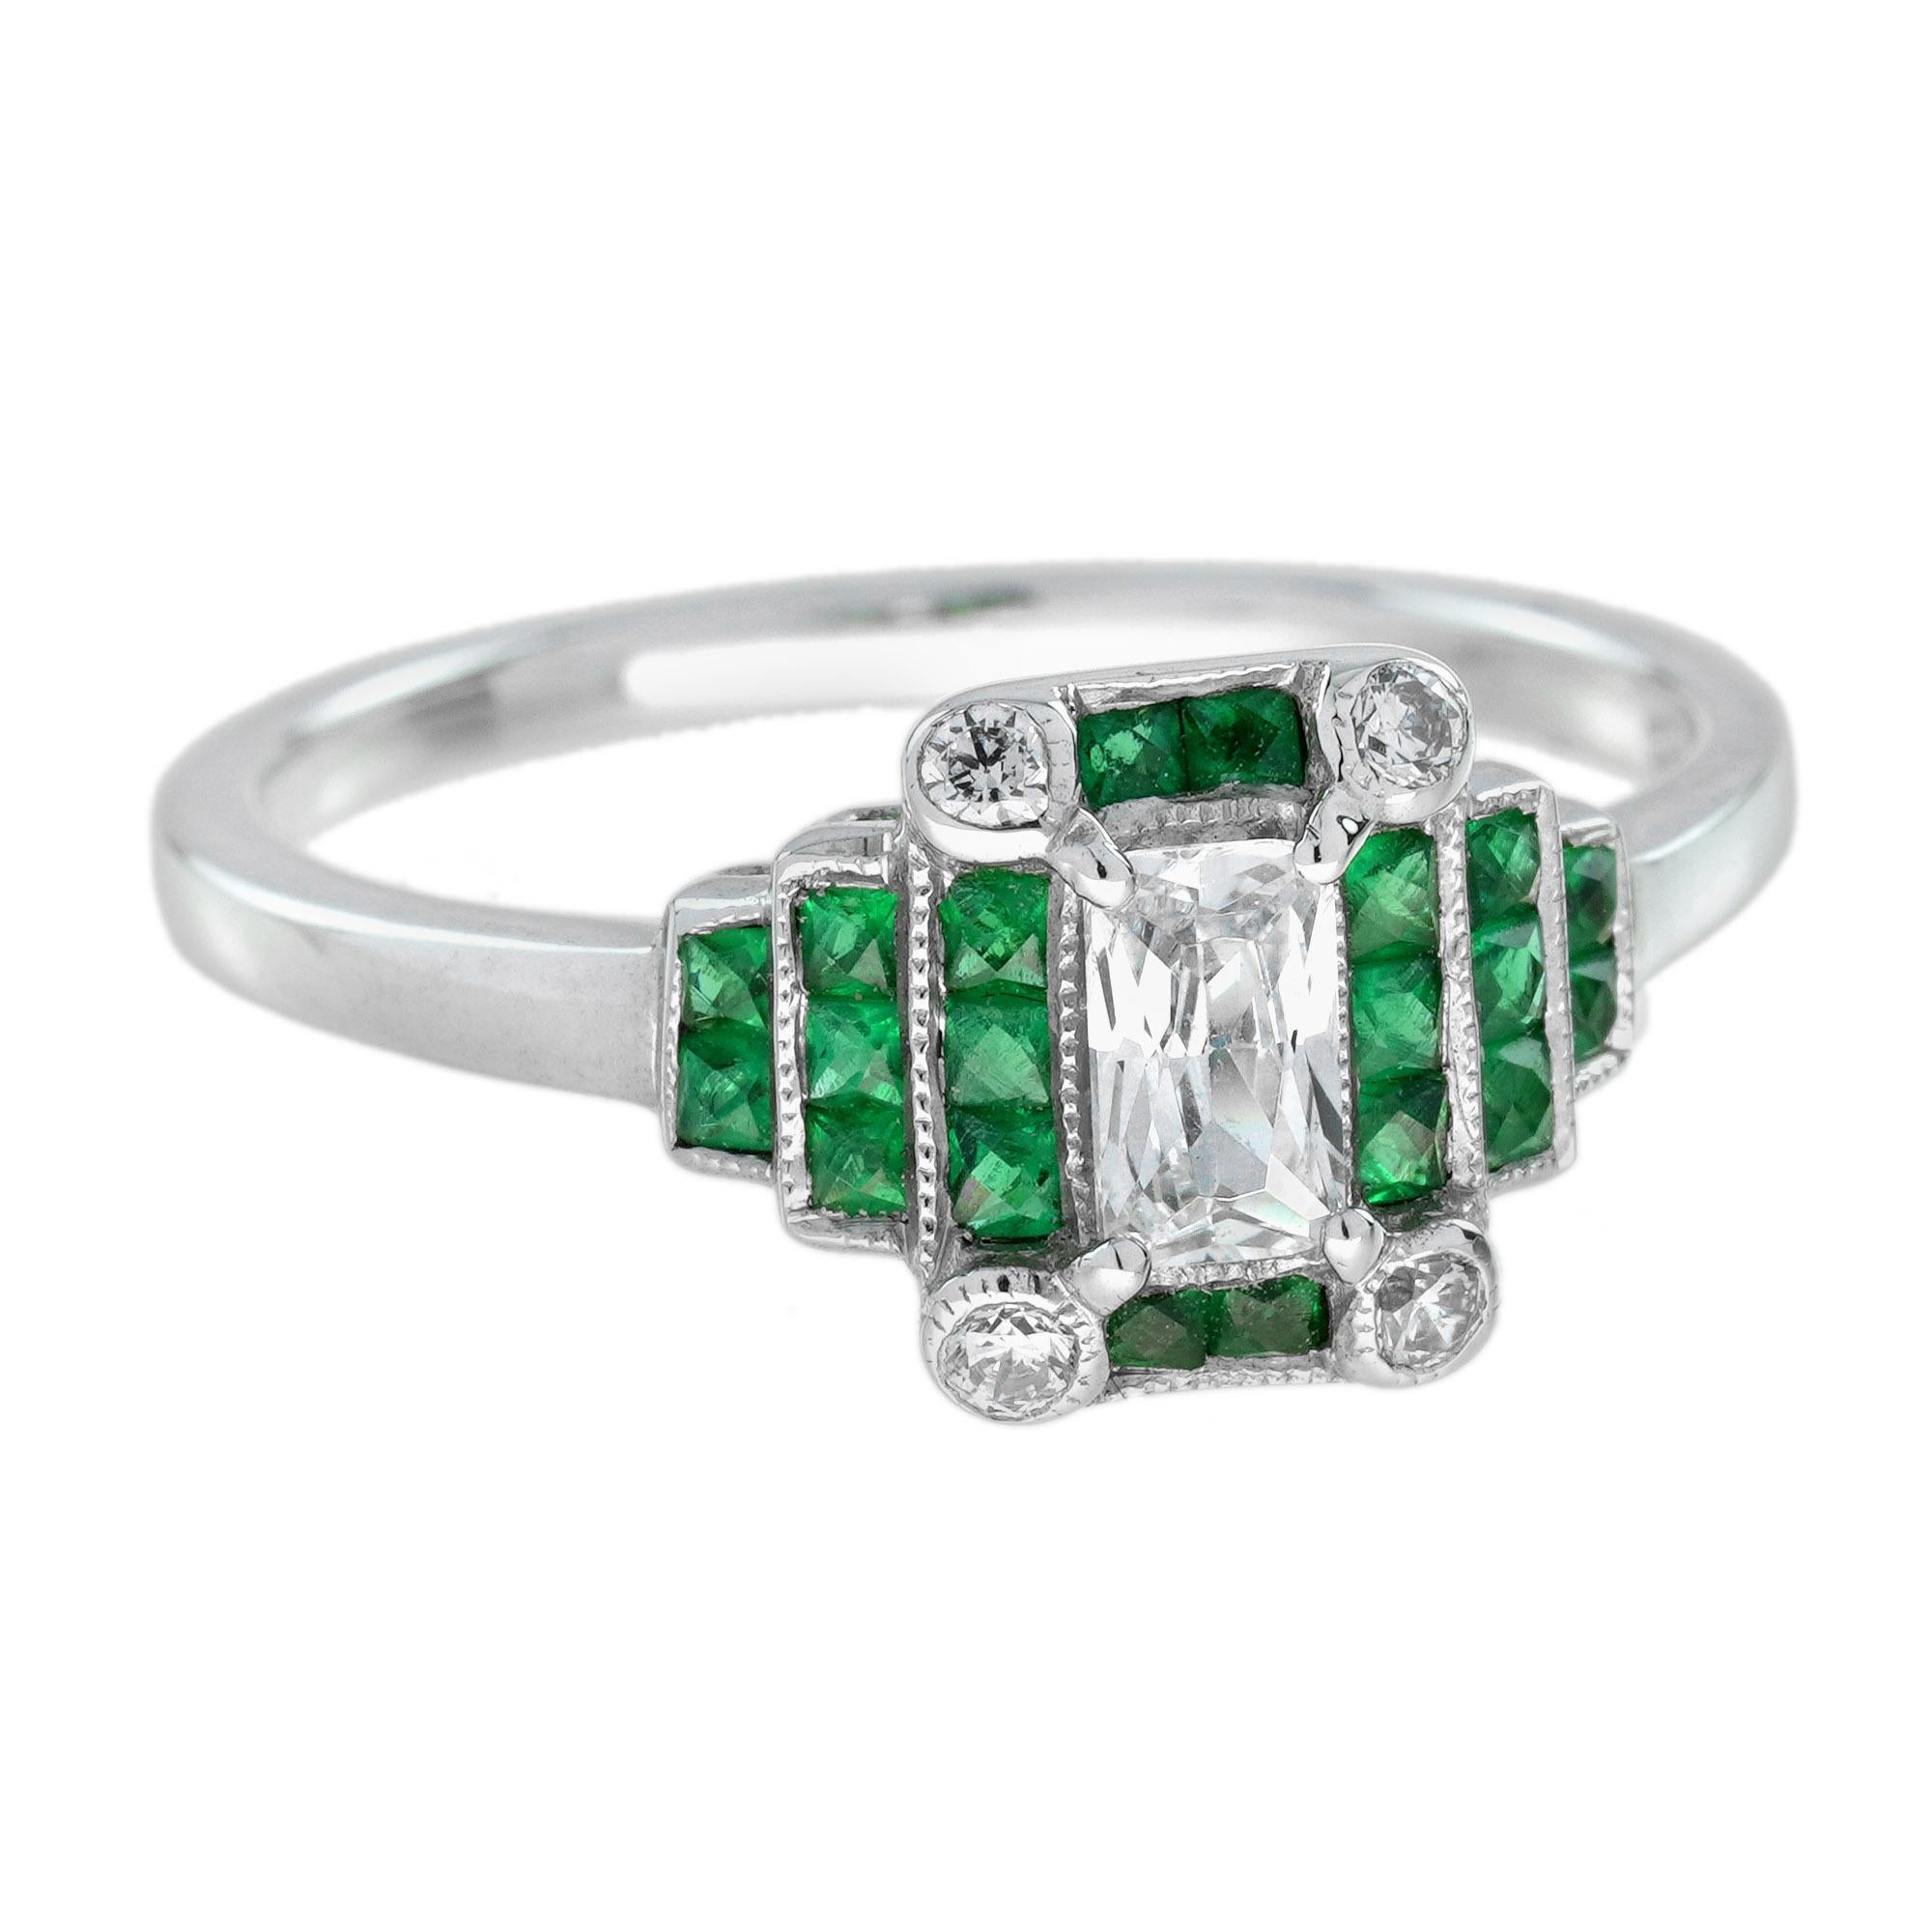 Radiant Cut 0.22 Ct. Diamond and Emerald Step Shoulder Art Deco Style Ring in 18K White Gold For Sale